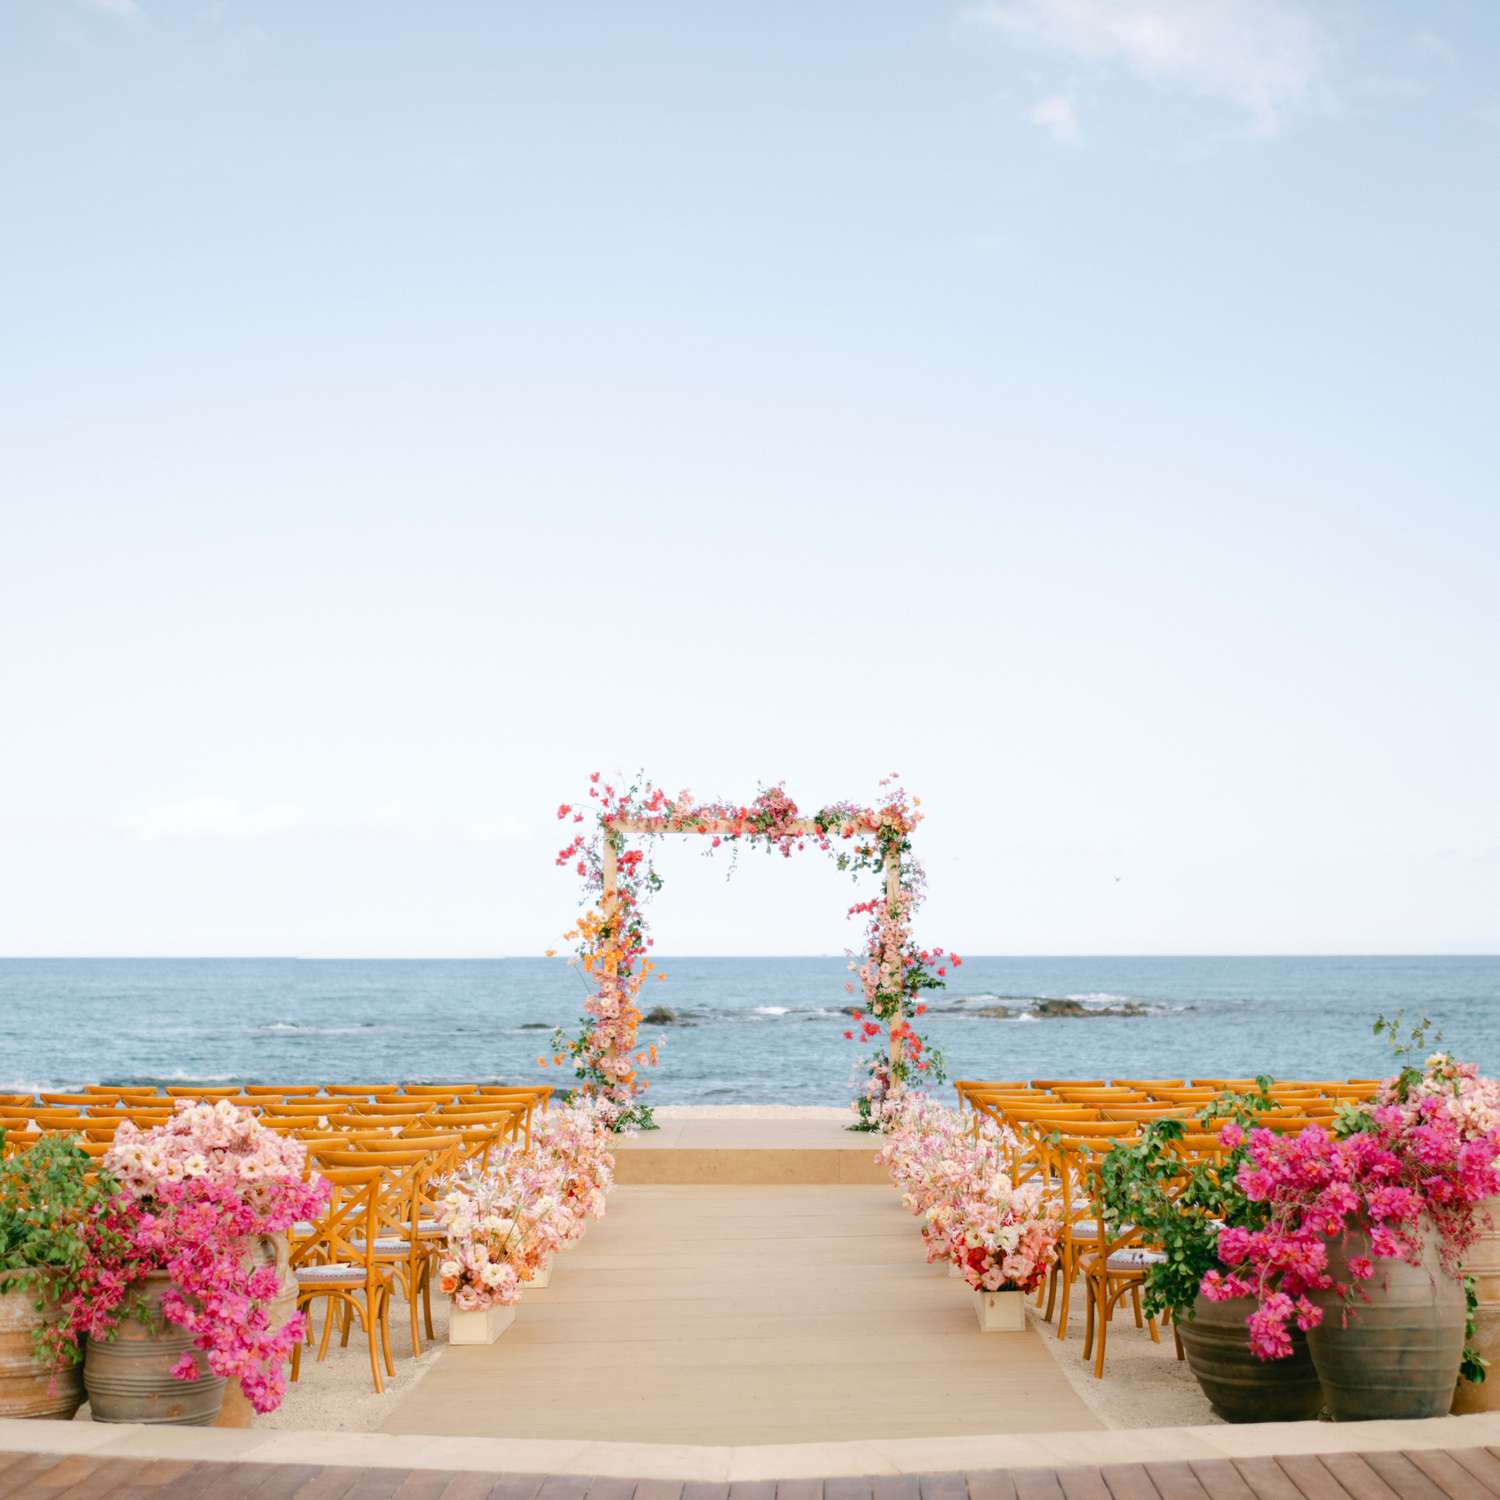 Ceremony Setup With Hot Pink Flowers Marking the Beginning and Perimeter of the Aisle and a Floral Arch Overlooking the Ocean